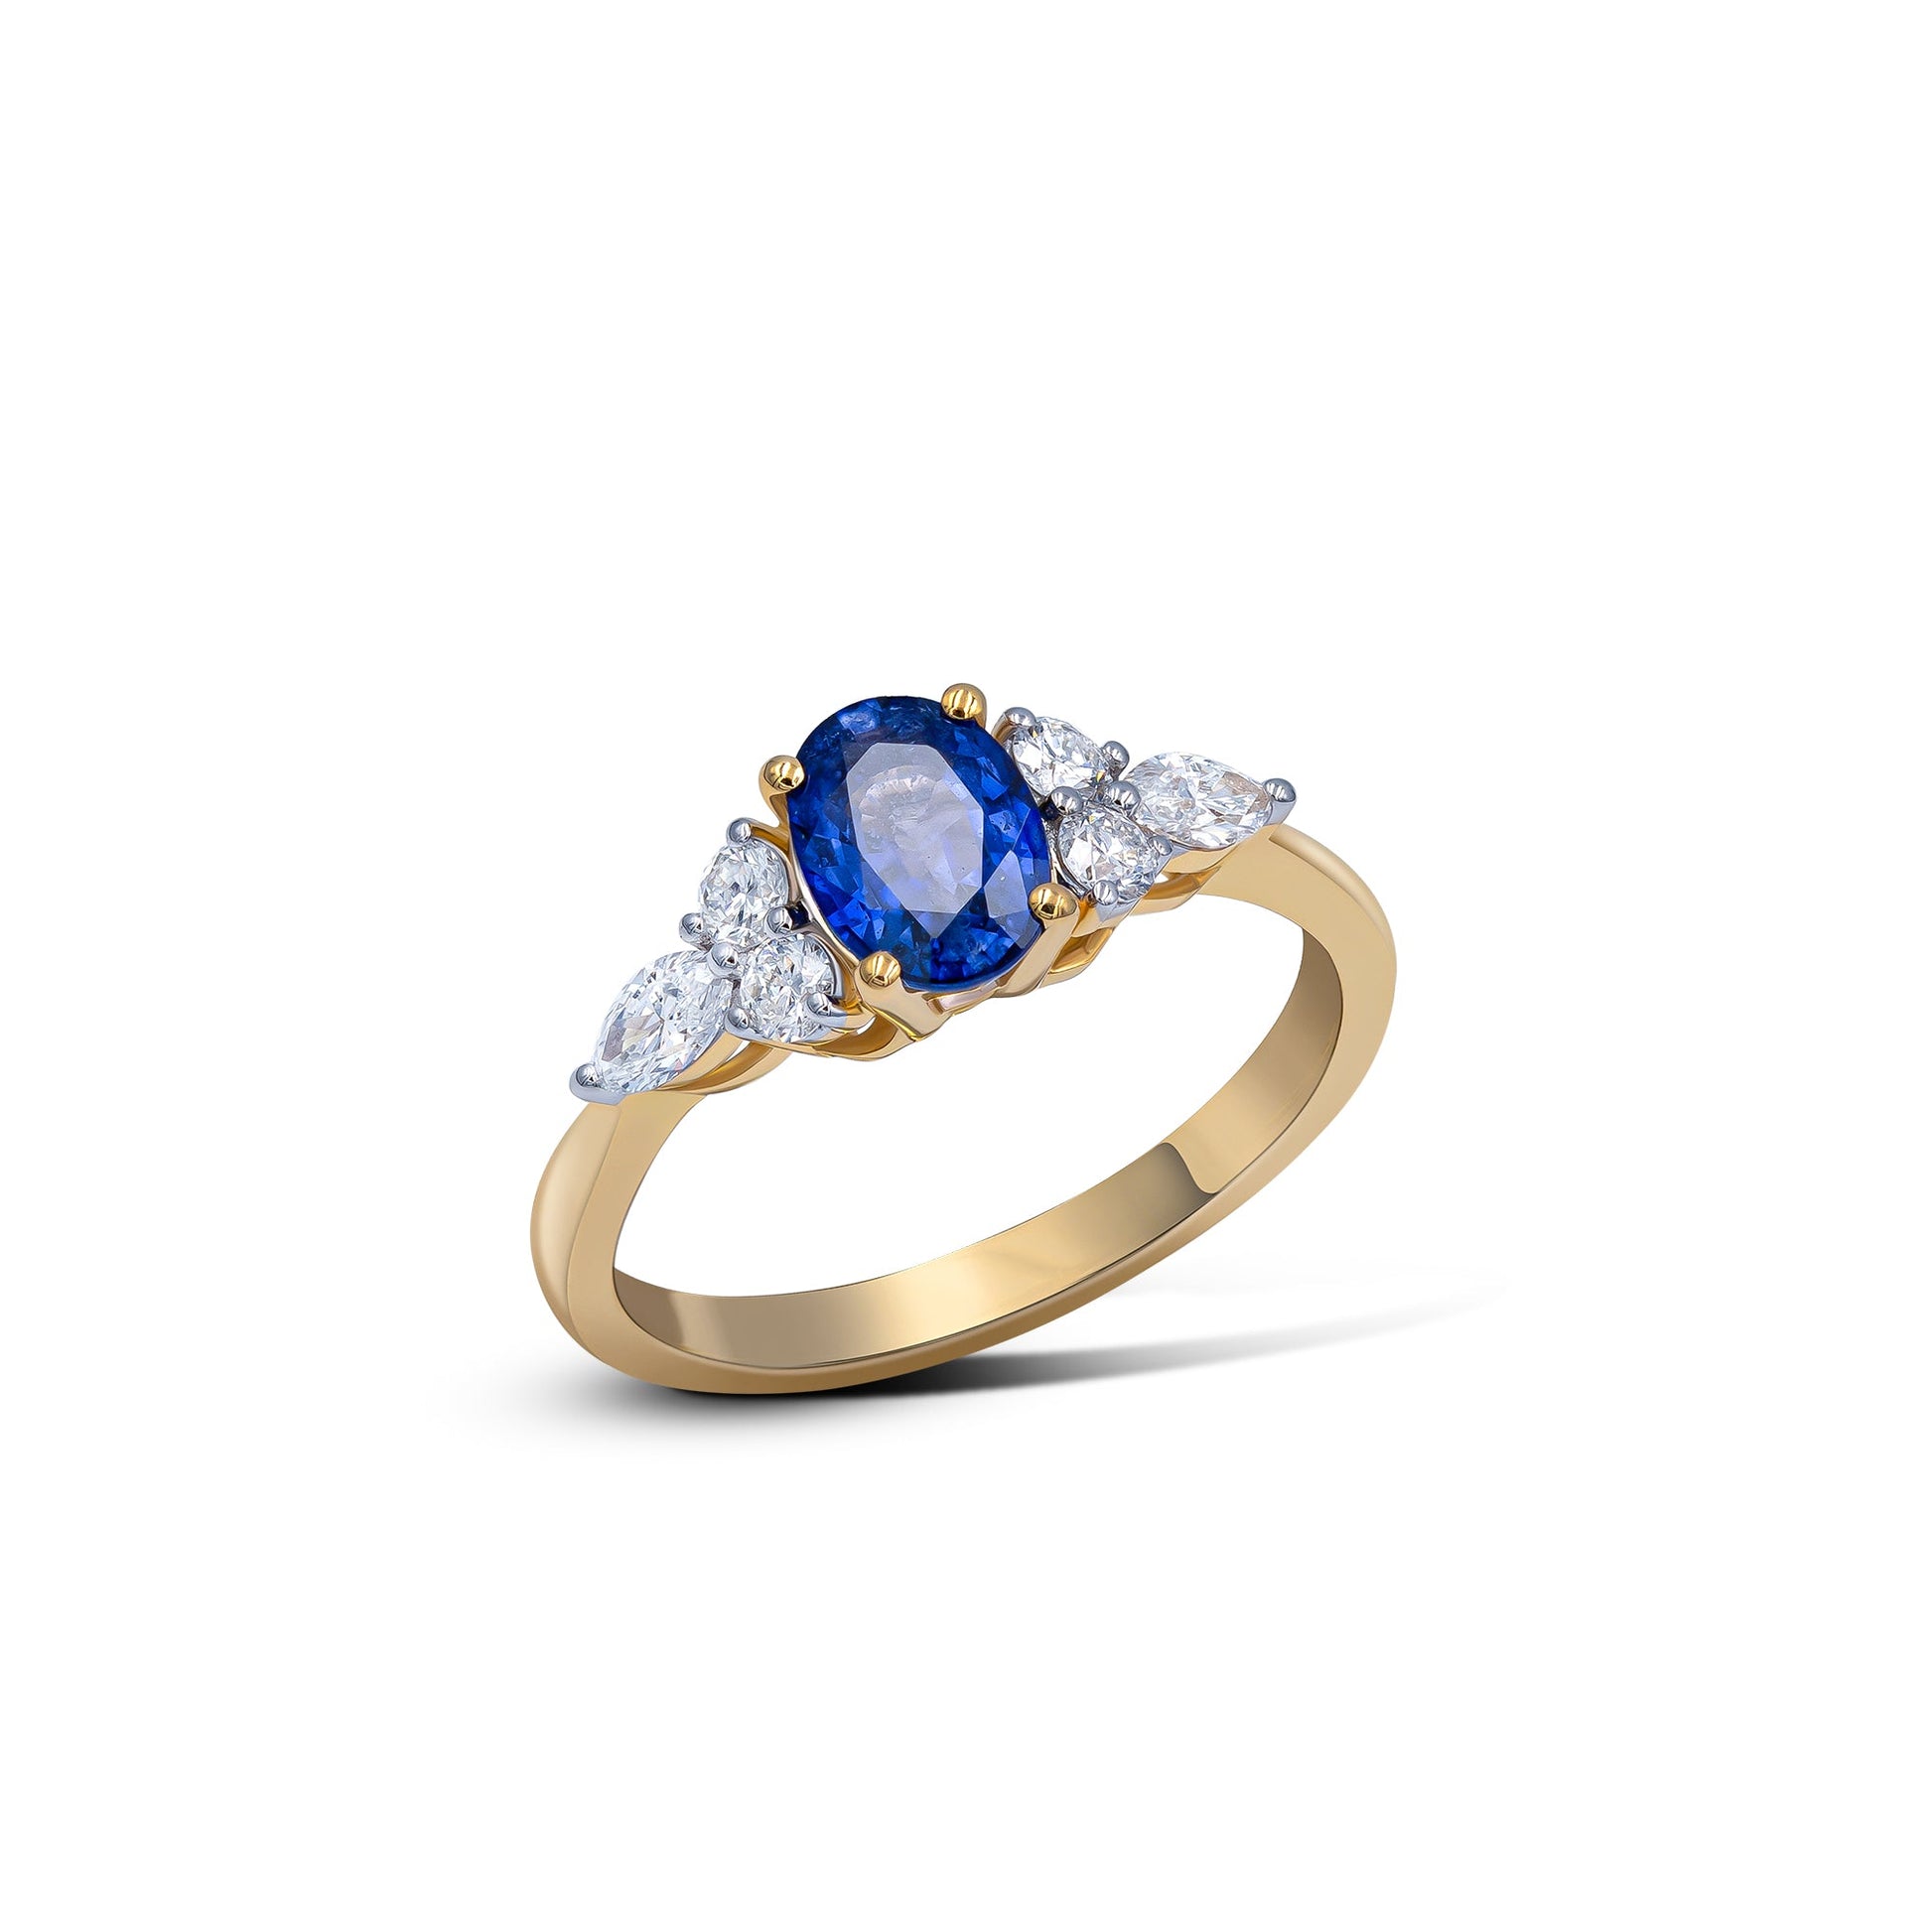 Eloise Ring in Diamond and Sapphire - 18k Gold - Lynor